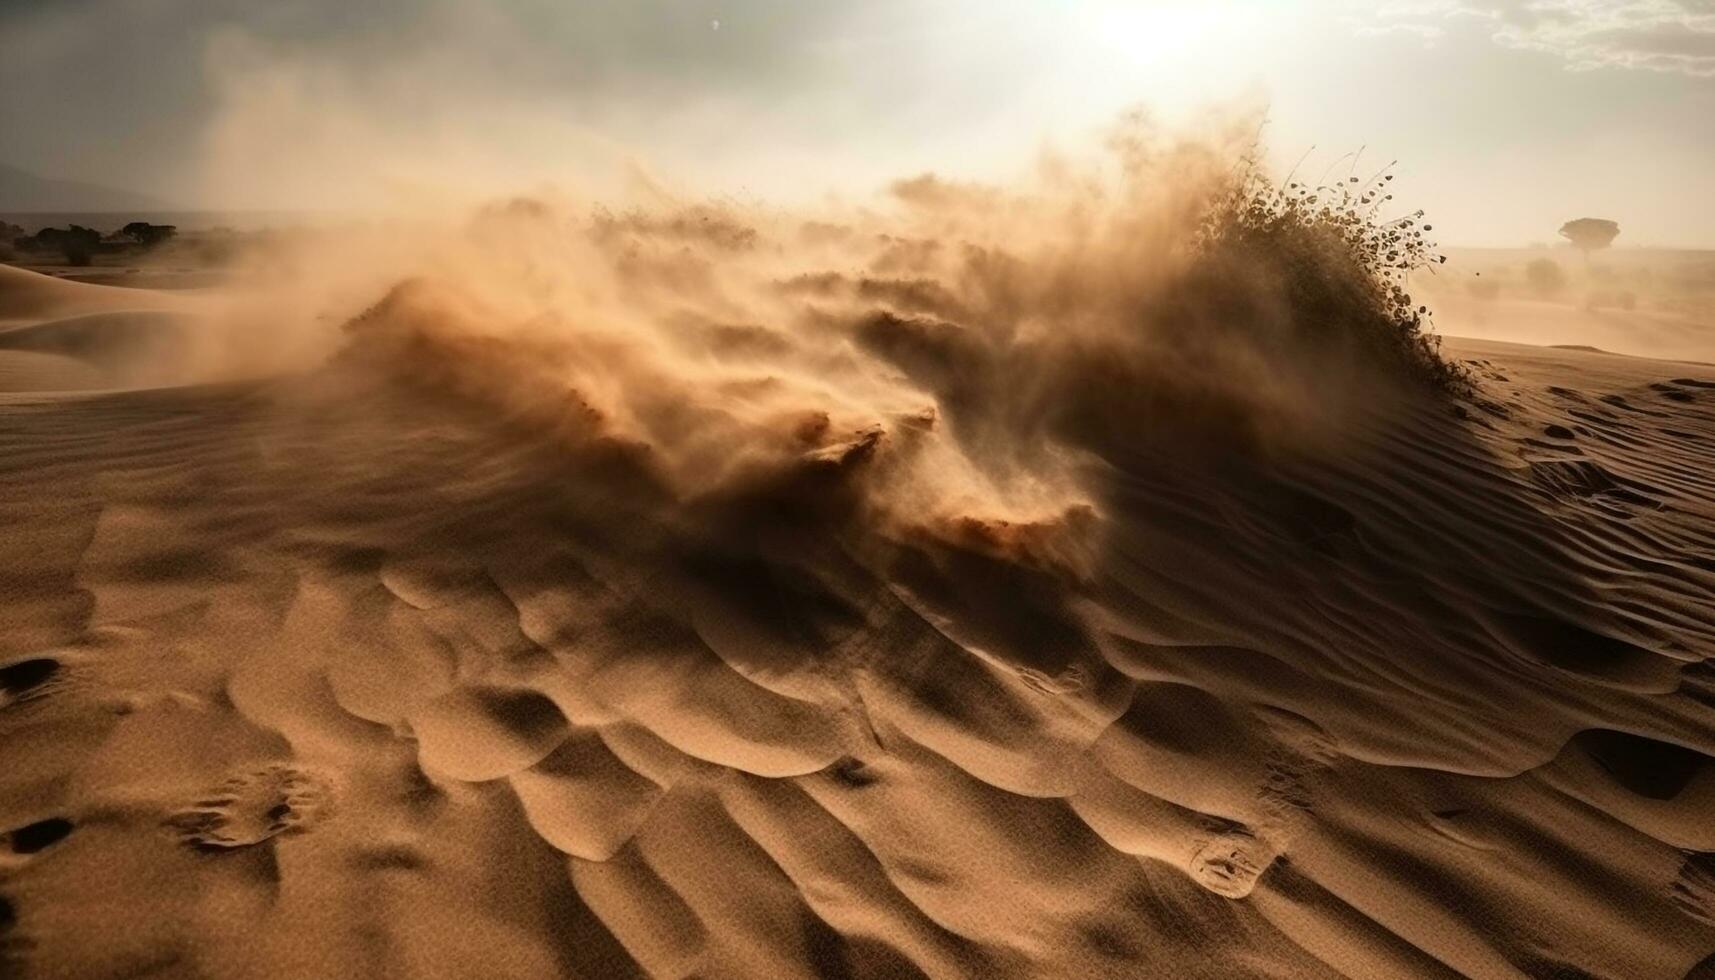 The majestic sand dunes ripple in the arid African climate generated by AI photo